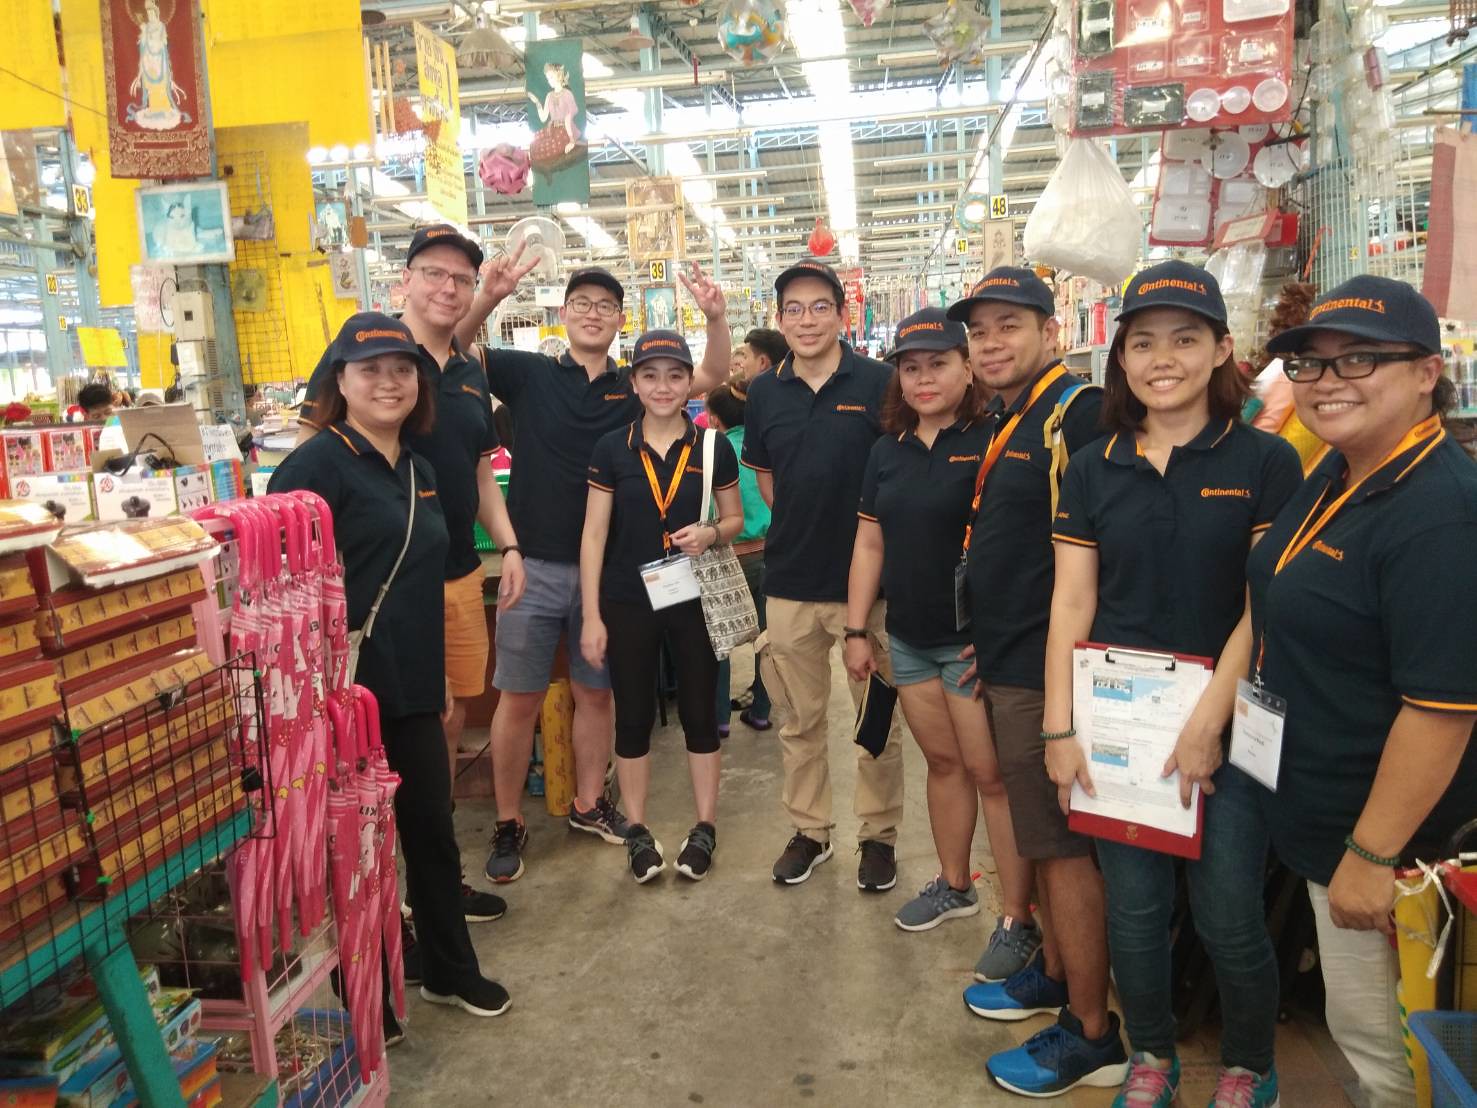 The Market Barter event for Continental Tyres in Pattaya offered a unique and interactive team-building experience